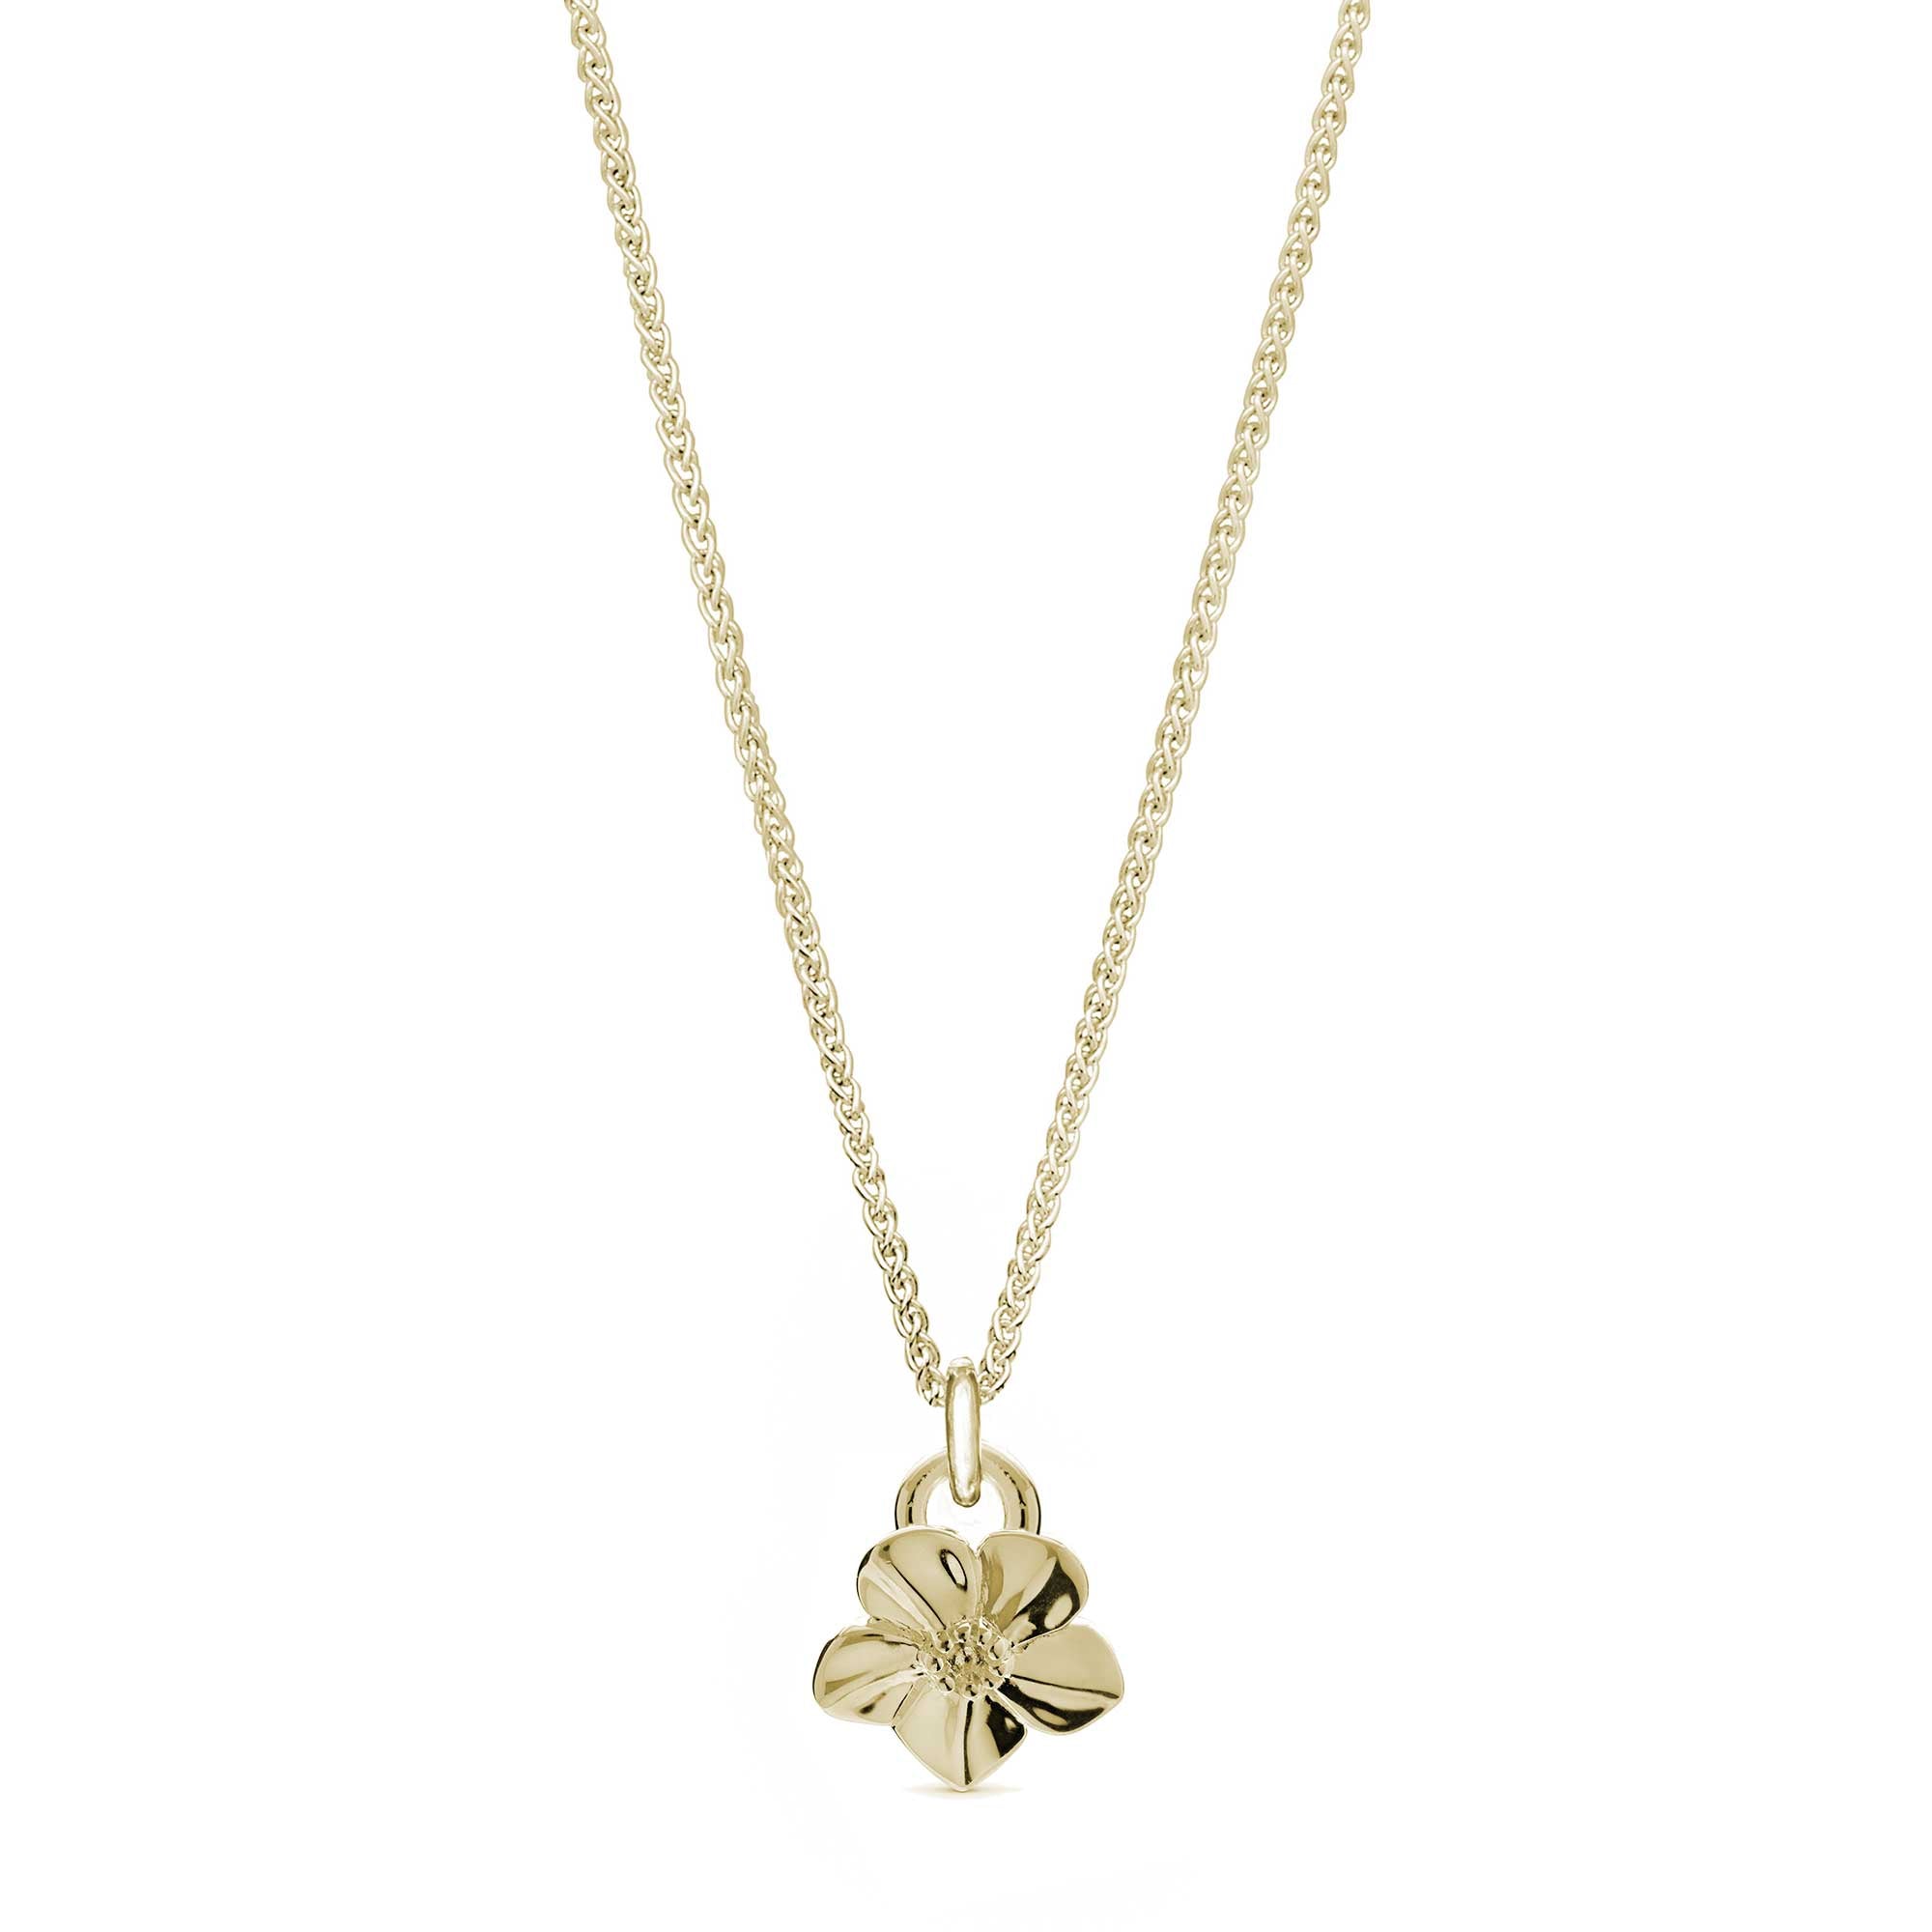 Solid gold forget-me-not flower necklace on gold chain designer Scarlett Jewellery Chelsea Flower Show